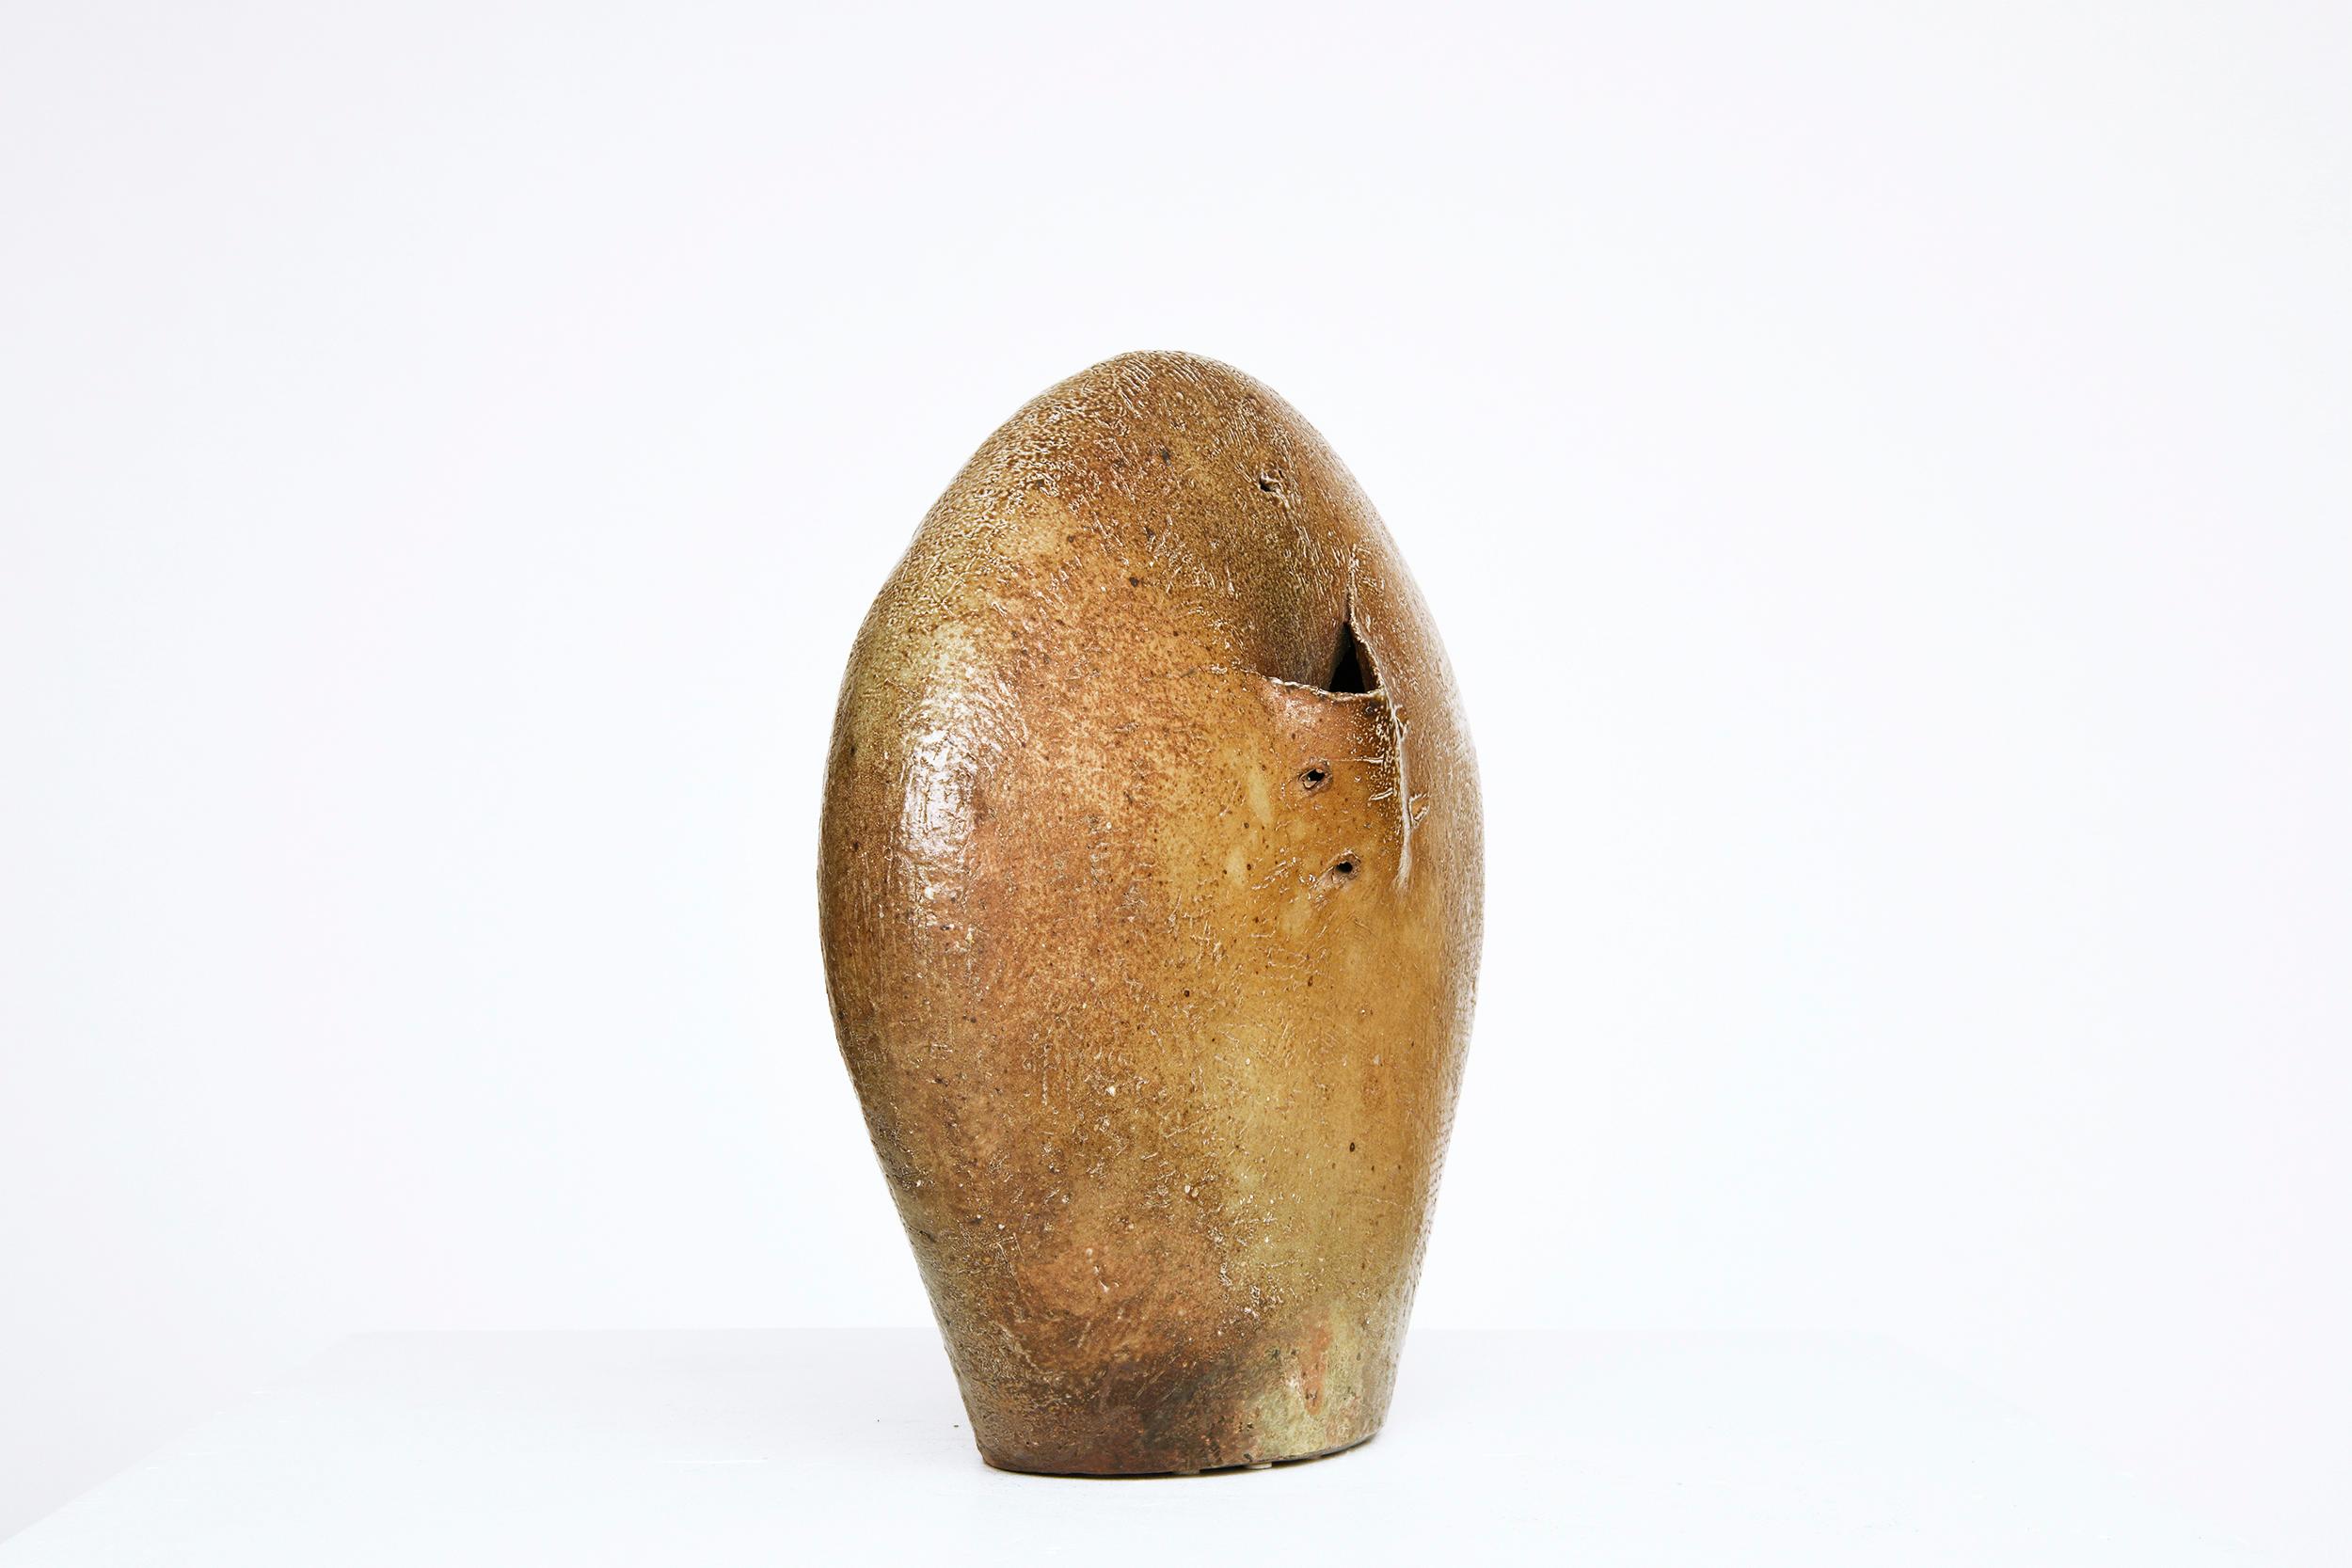 This is glazed ceramic vase by ceramicist Gustave Tiffoche circa 1975. A part of the La Borne ceramic movement, Tiffoche's techinque and glazing represents the pieces made during that time.